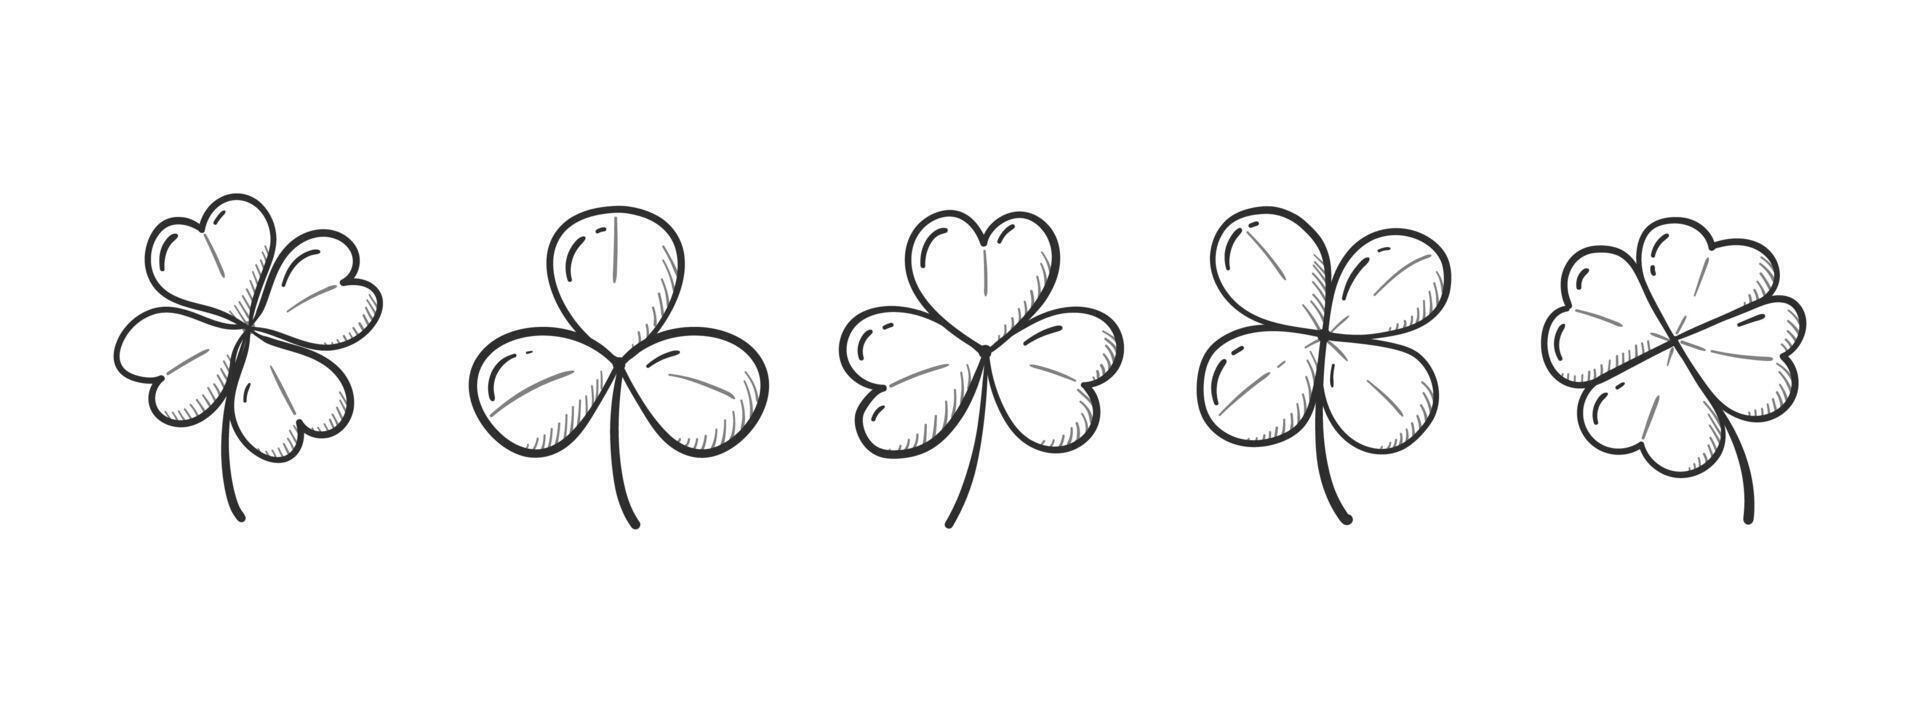 St.Patrick 's Day. in doodle style clover leaves. vector